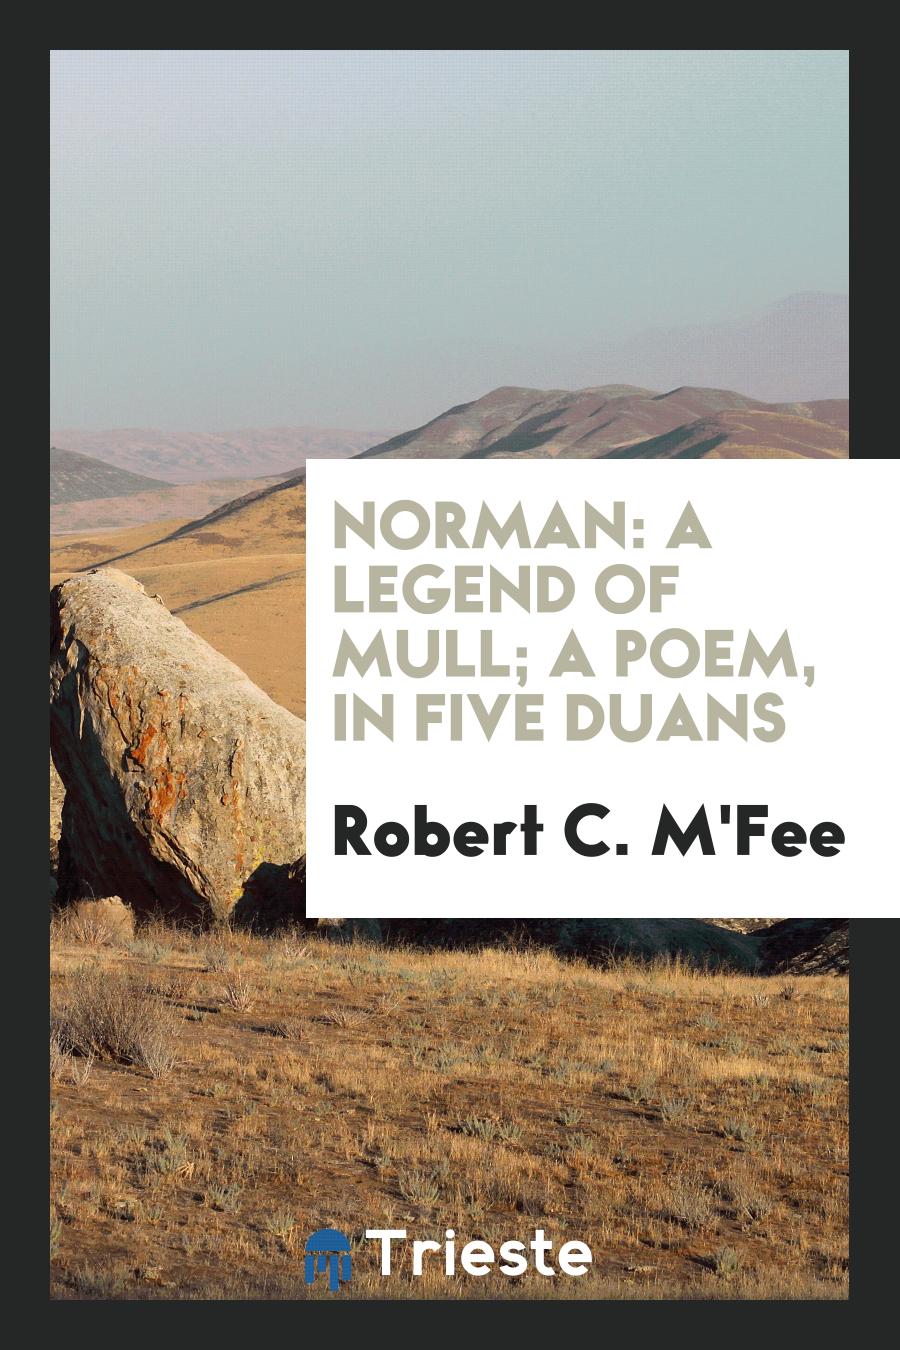 Norman: A Legend of Mull; A Poem, in Five Duans